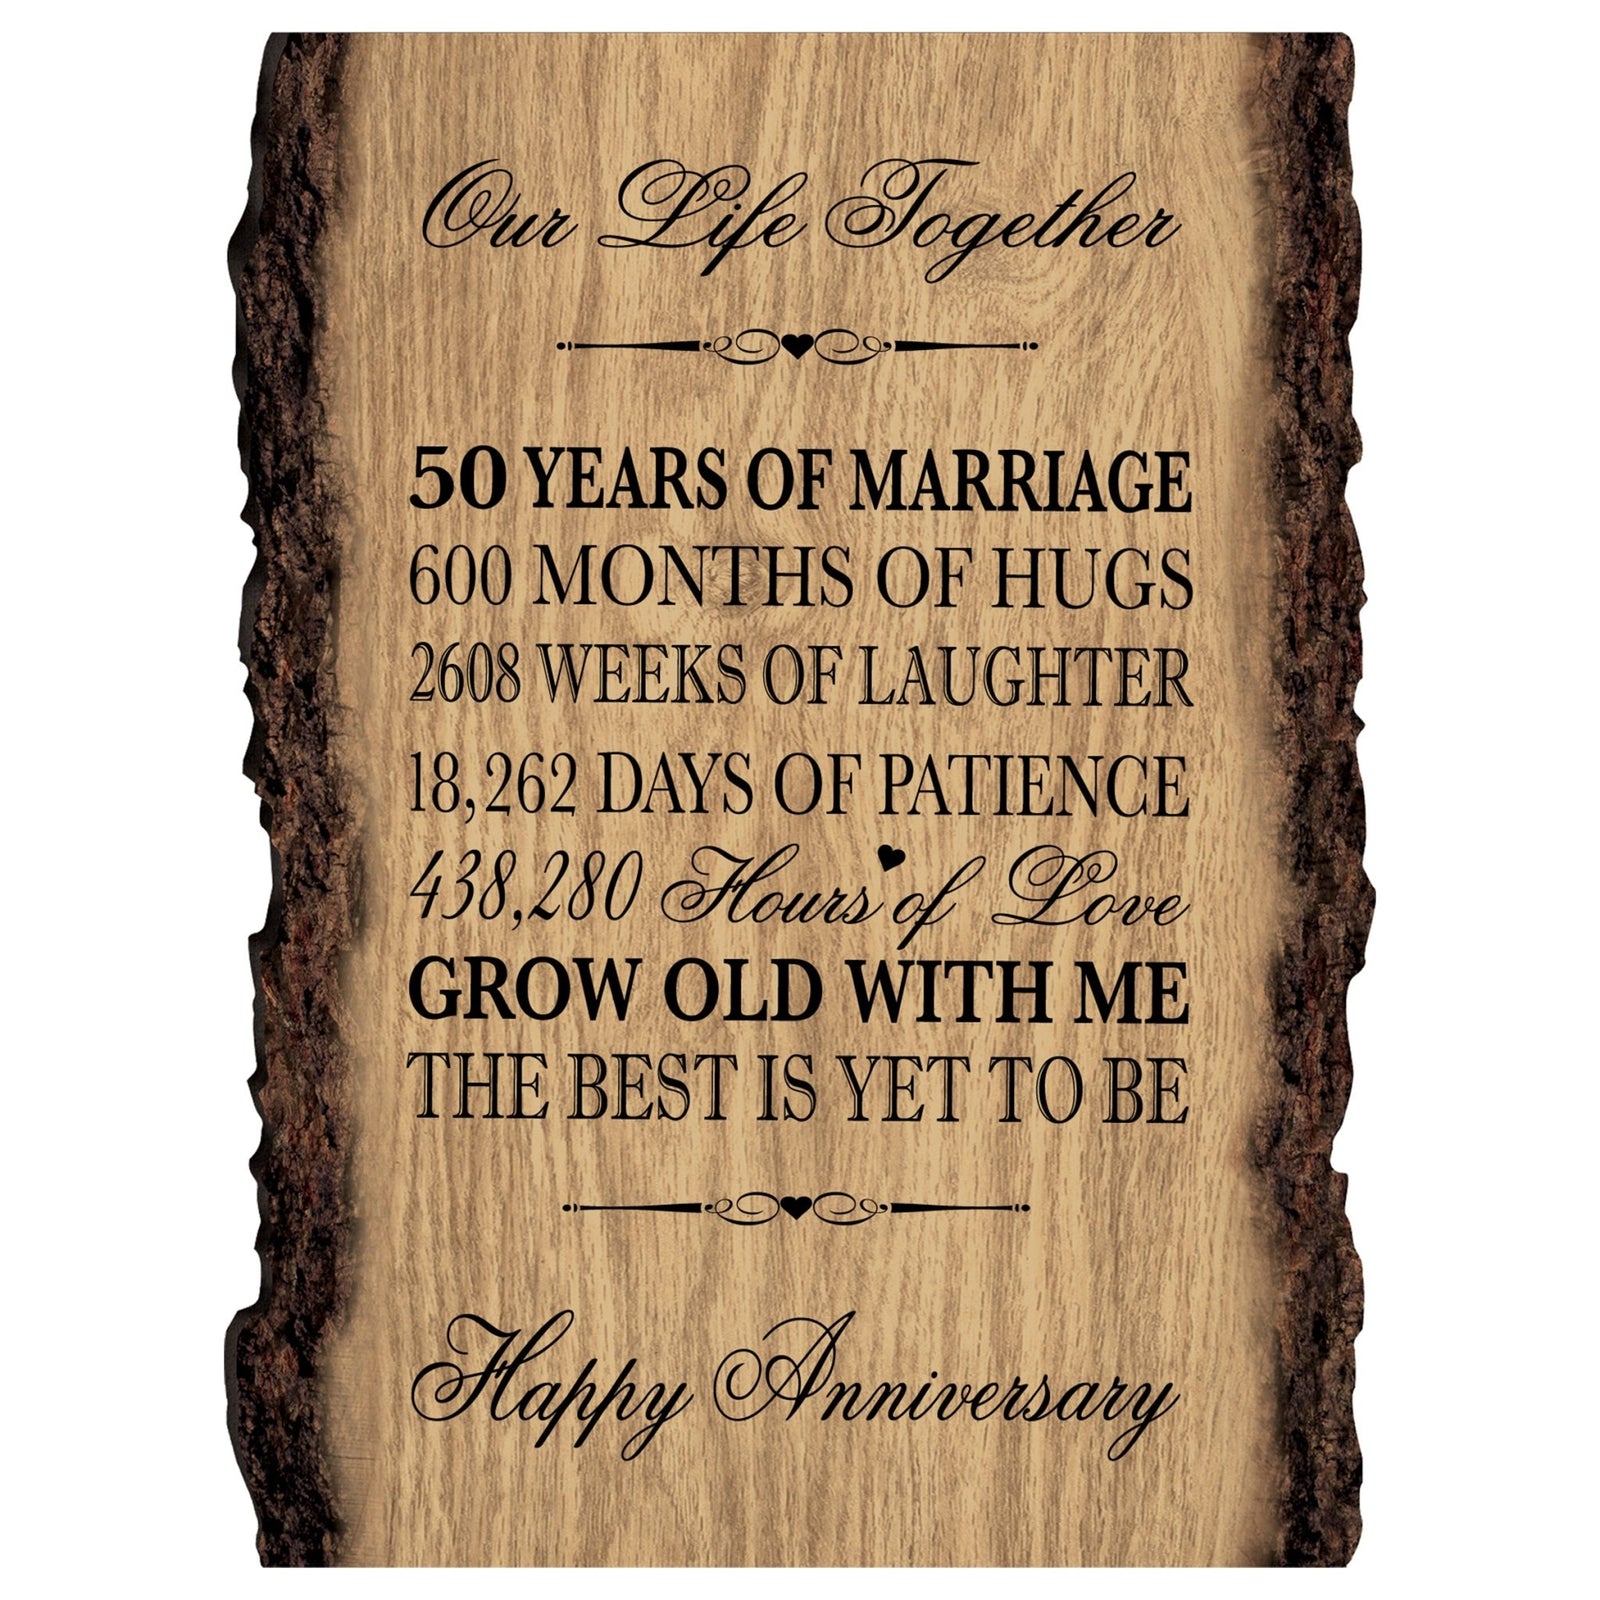 Rustic Wedding Anniversary 9x12 Barky Wall Plaque Gift For Parents, Grandparents New Couple - 50 Years Of Marriage - LifeSong Milestones